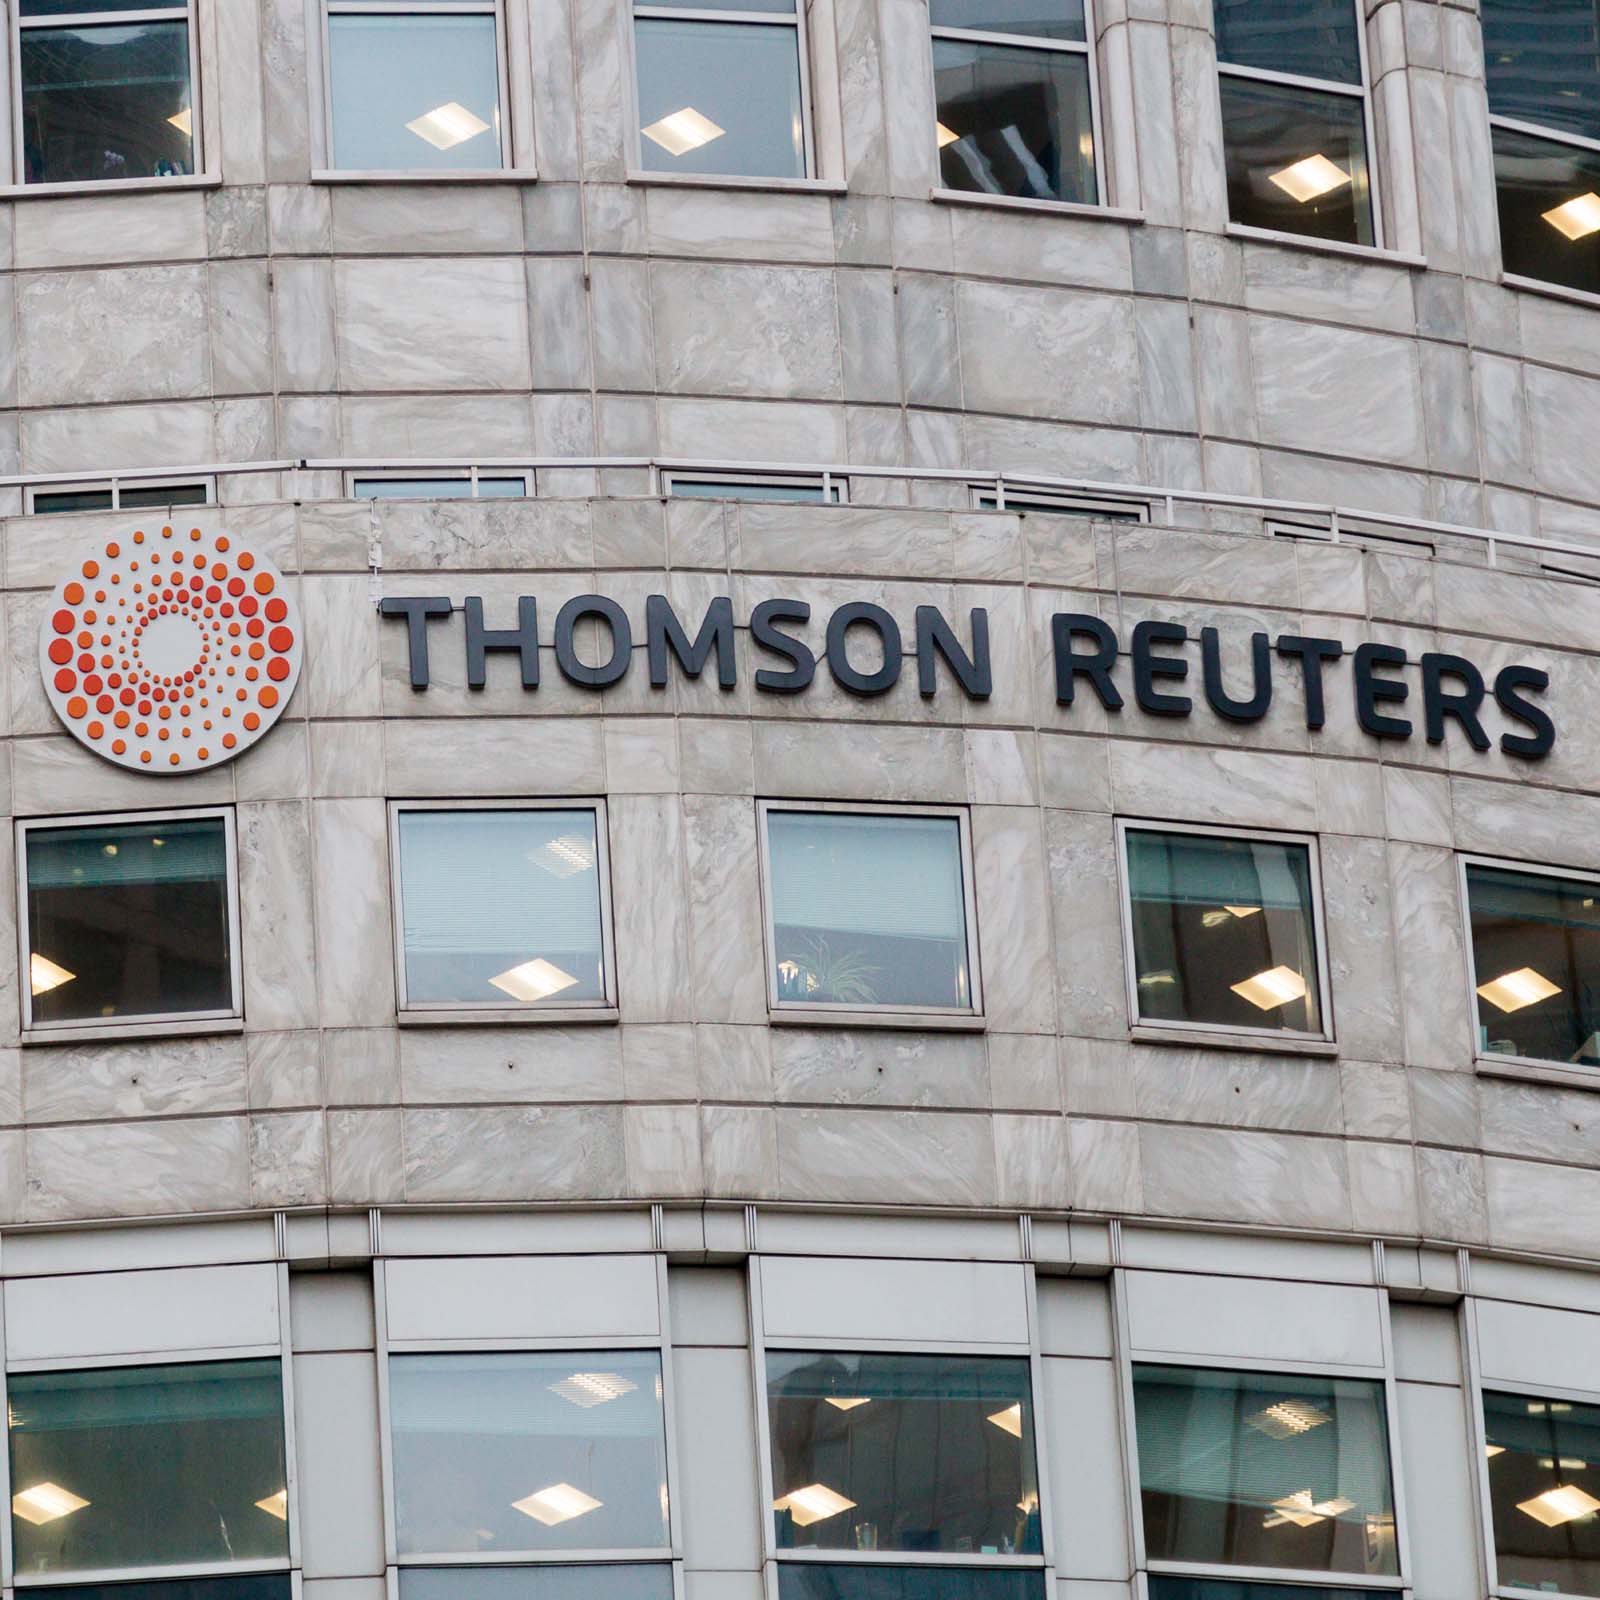 Bitcoin in Brief Thursday: Thomson Reuters to Track Top 100 Cryptocurrencies